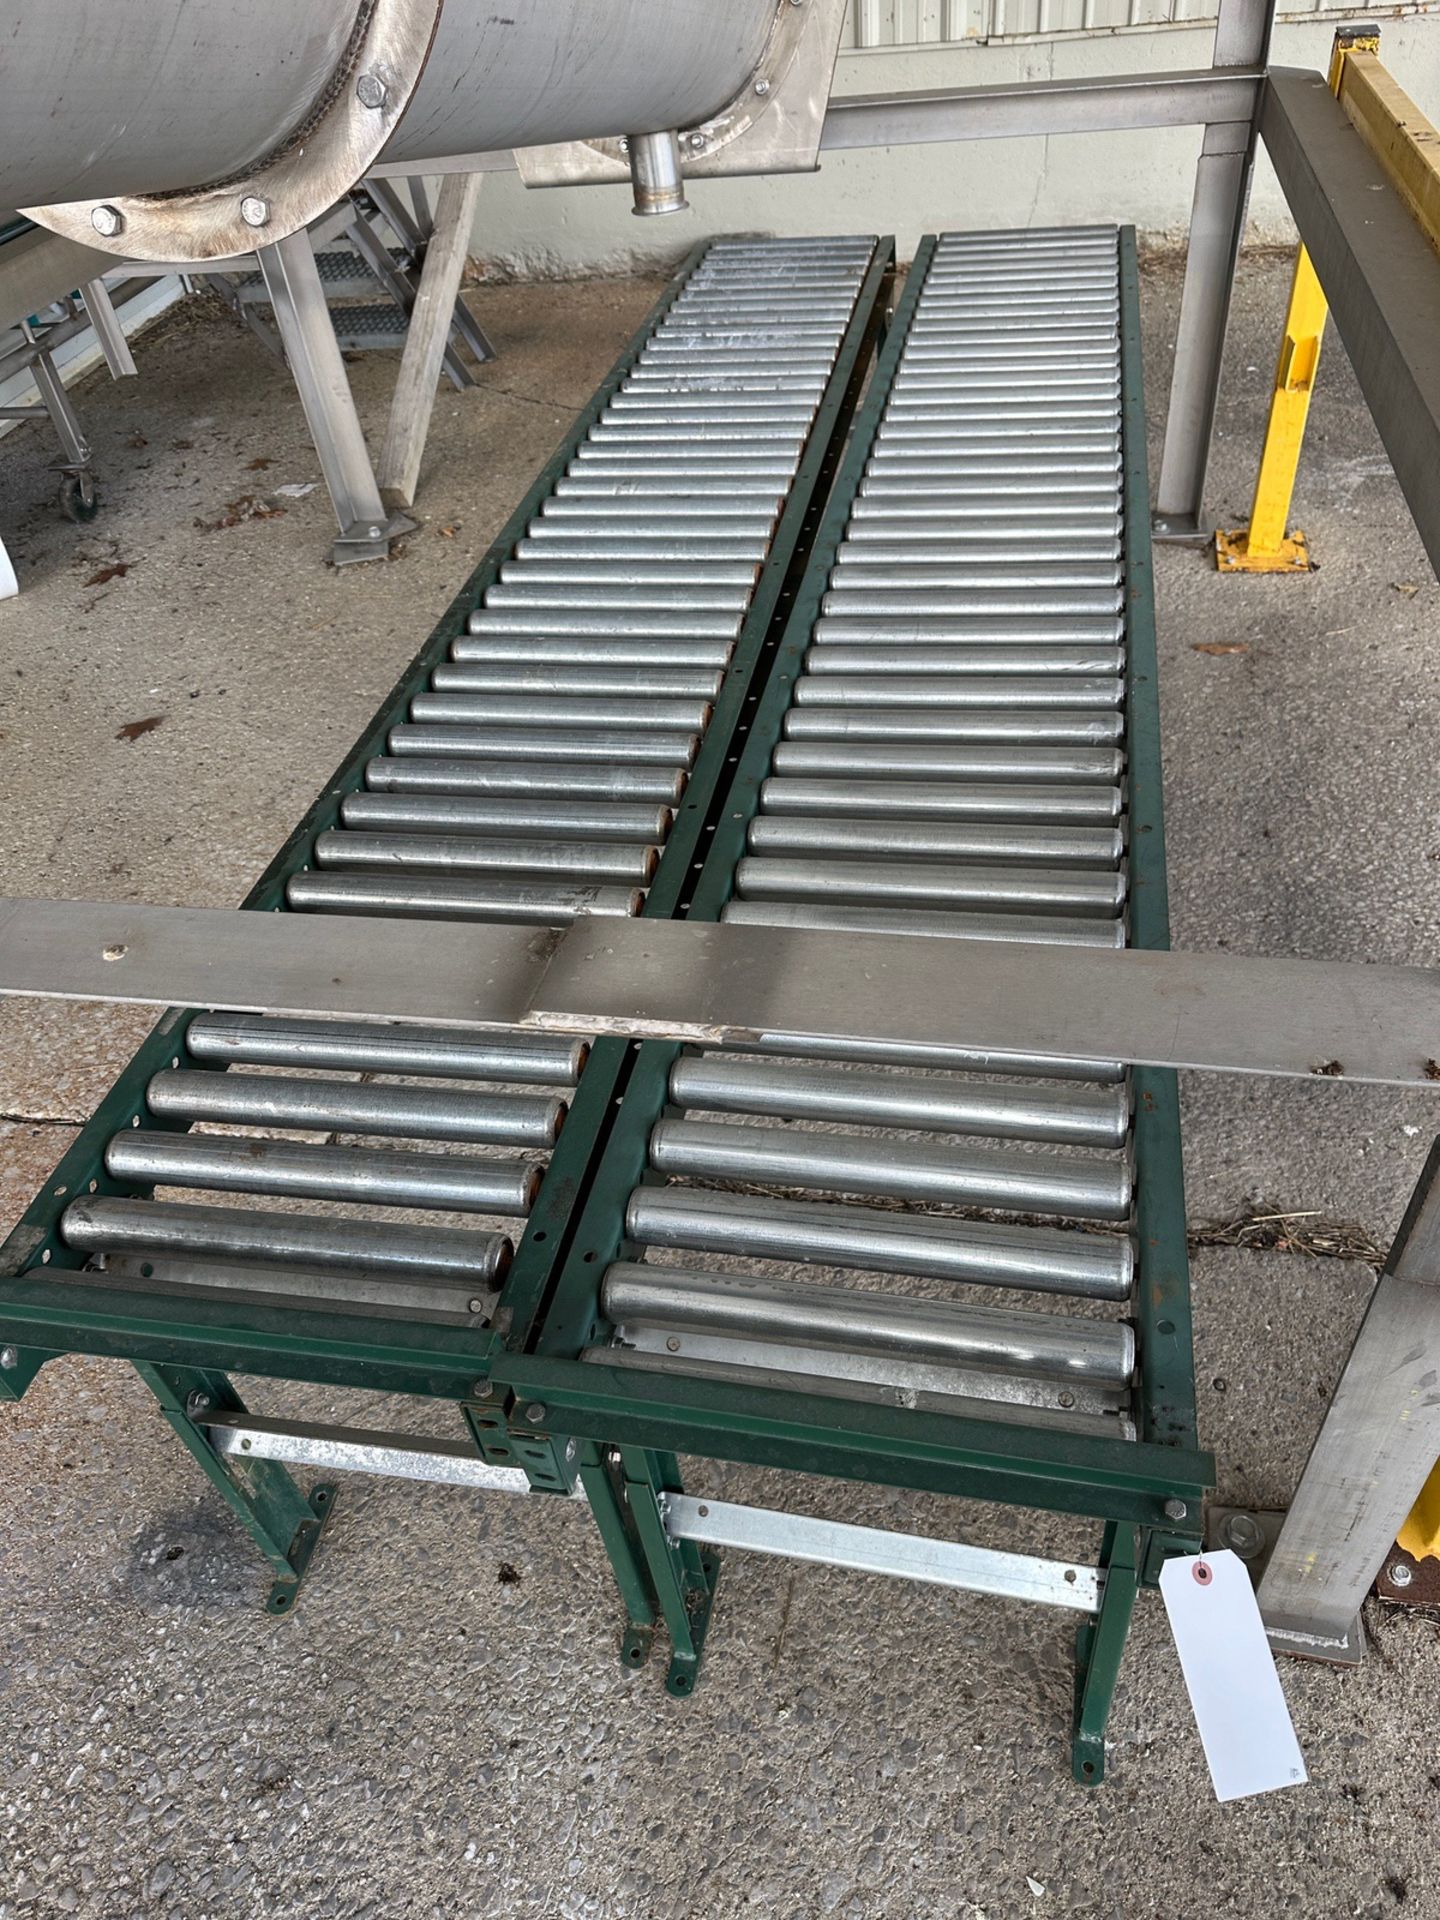 Lot of (2) Ashland Roller Conveyors (Approx. 16" x 10' Each) | Rig Fee $50